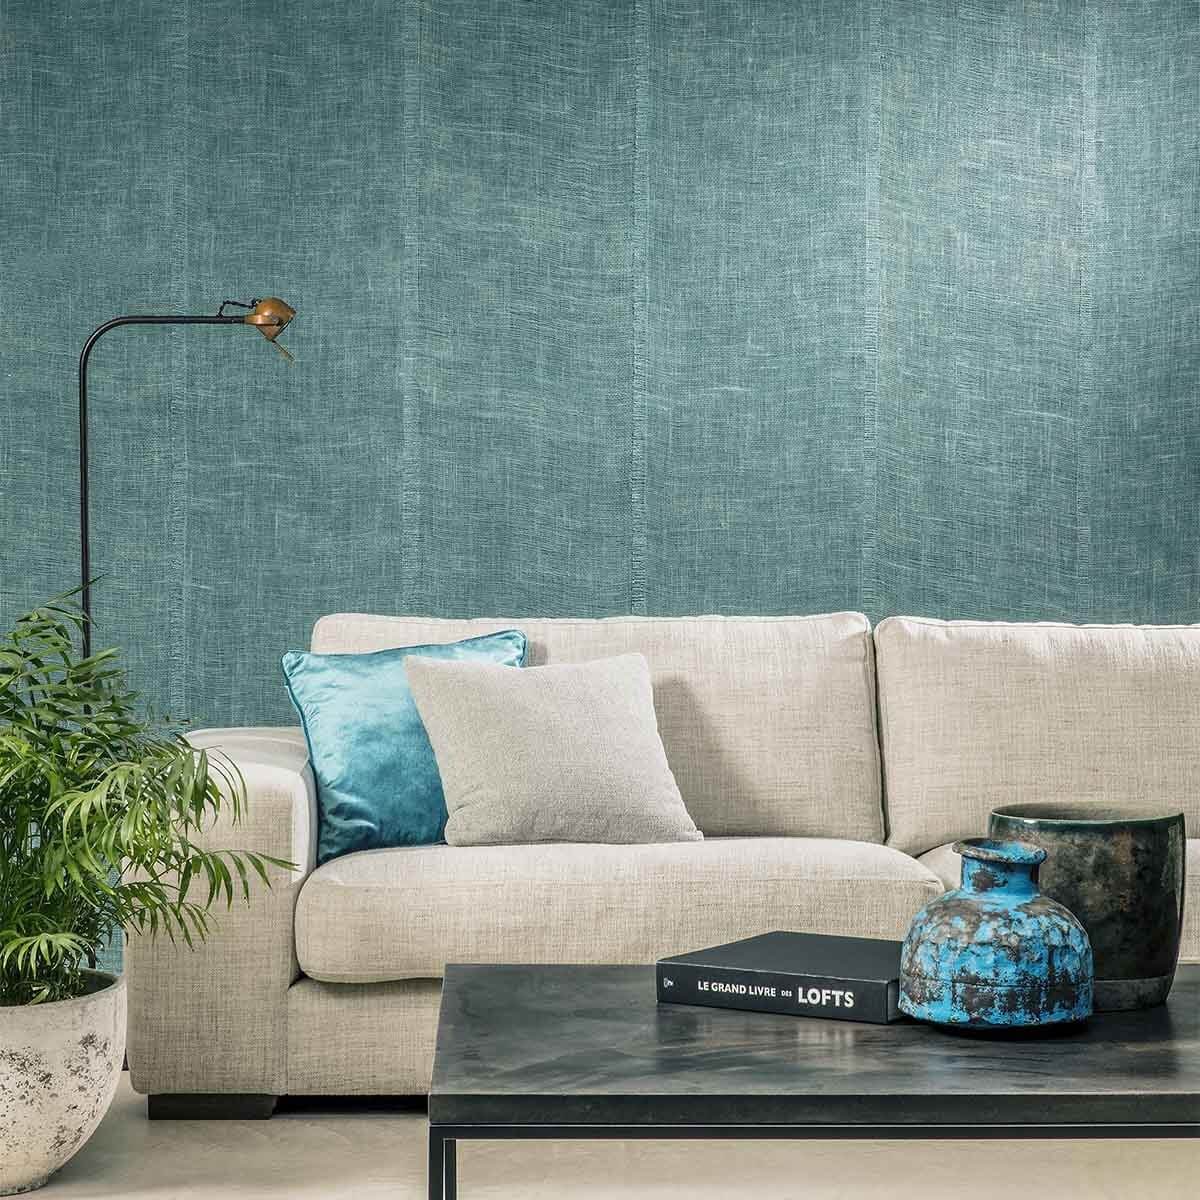 Home Rustic Wall Papers Korean Decor Floral Wall Paper Roll For Walls  Living Room Bedroom Papel Mural Contact Papier Peint